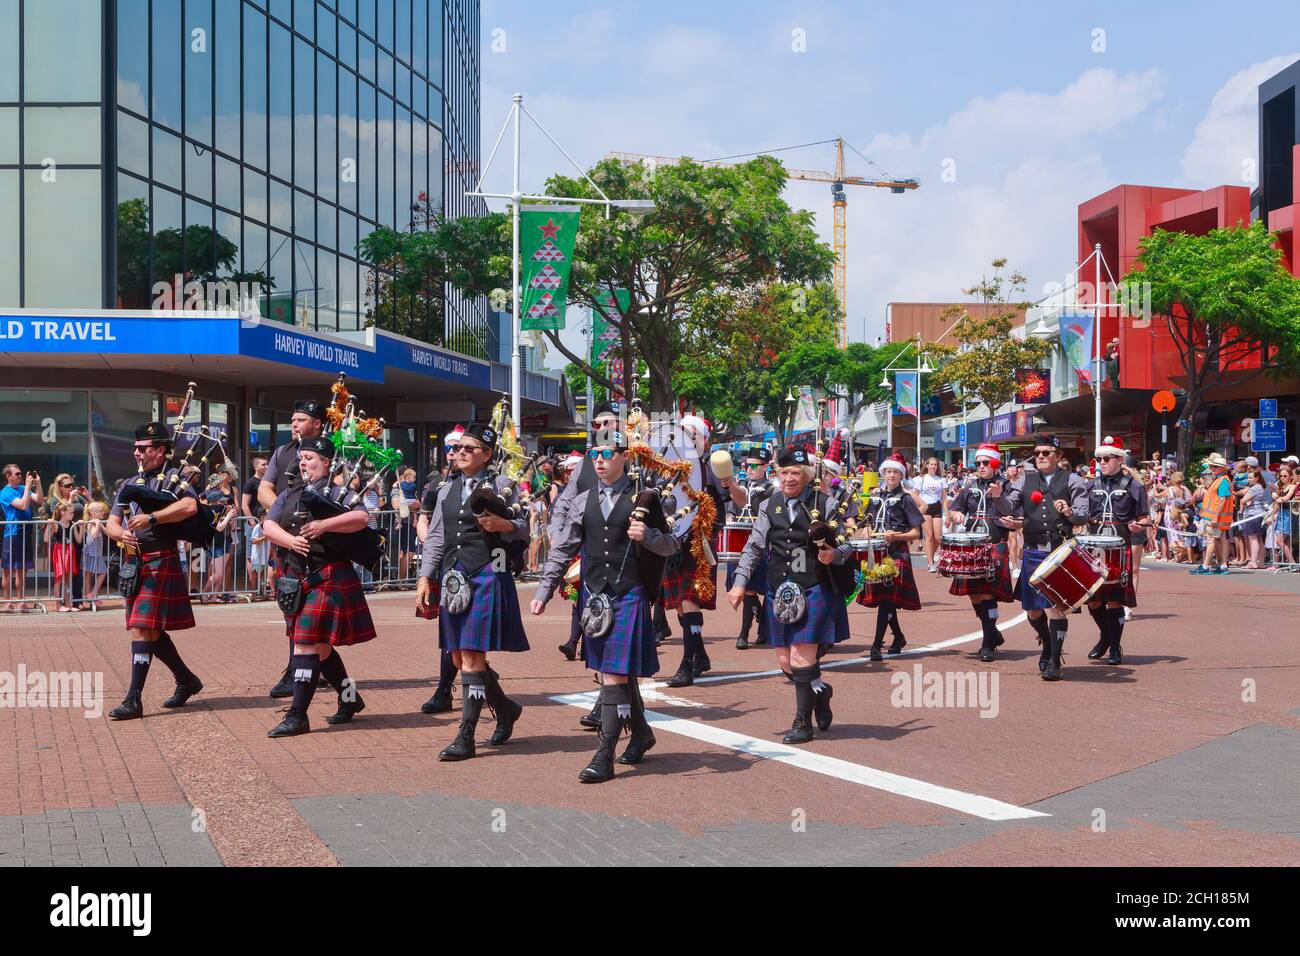 A Scottish pipe and drum band, with tinsel on their bagpipes, marching in a Christmas parade. Tauranga, New Zealand, November 30 2019 Stock Photo